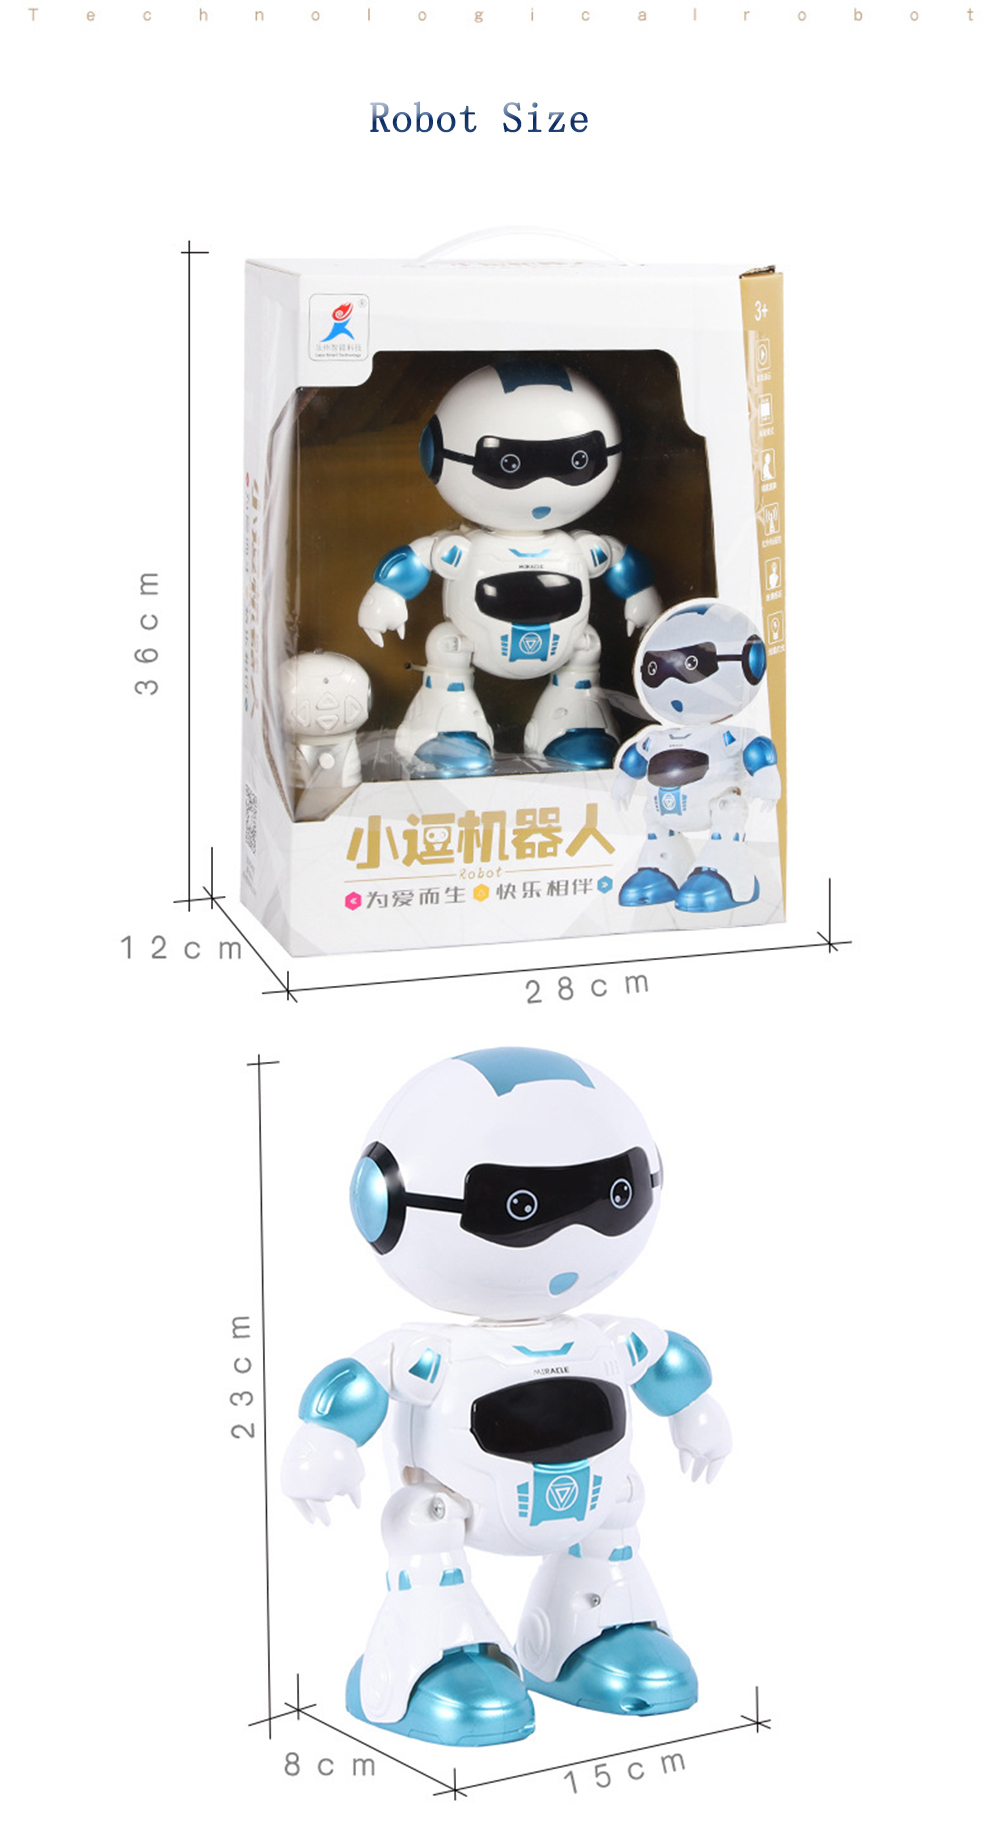 LeZhou-Smart-Touch-Control-Programmable-Voice-Interaction-Sing-Dance-RC-Robot-Toy-Gift-For-Children-1521513-10